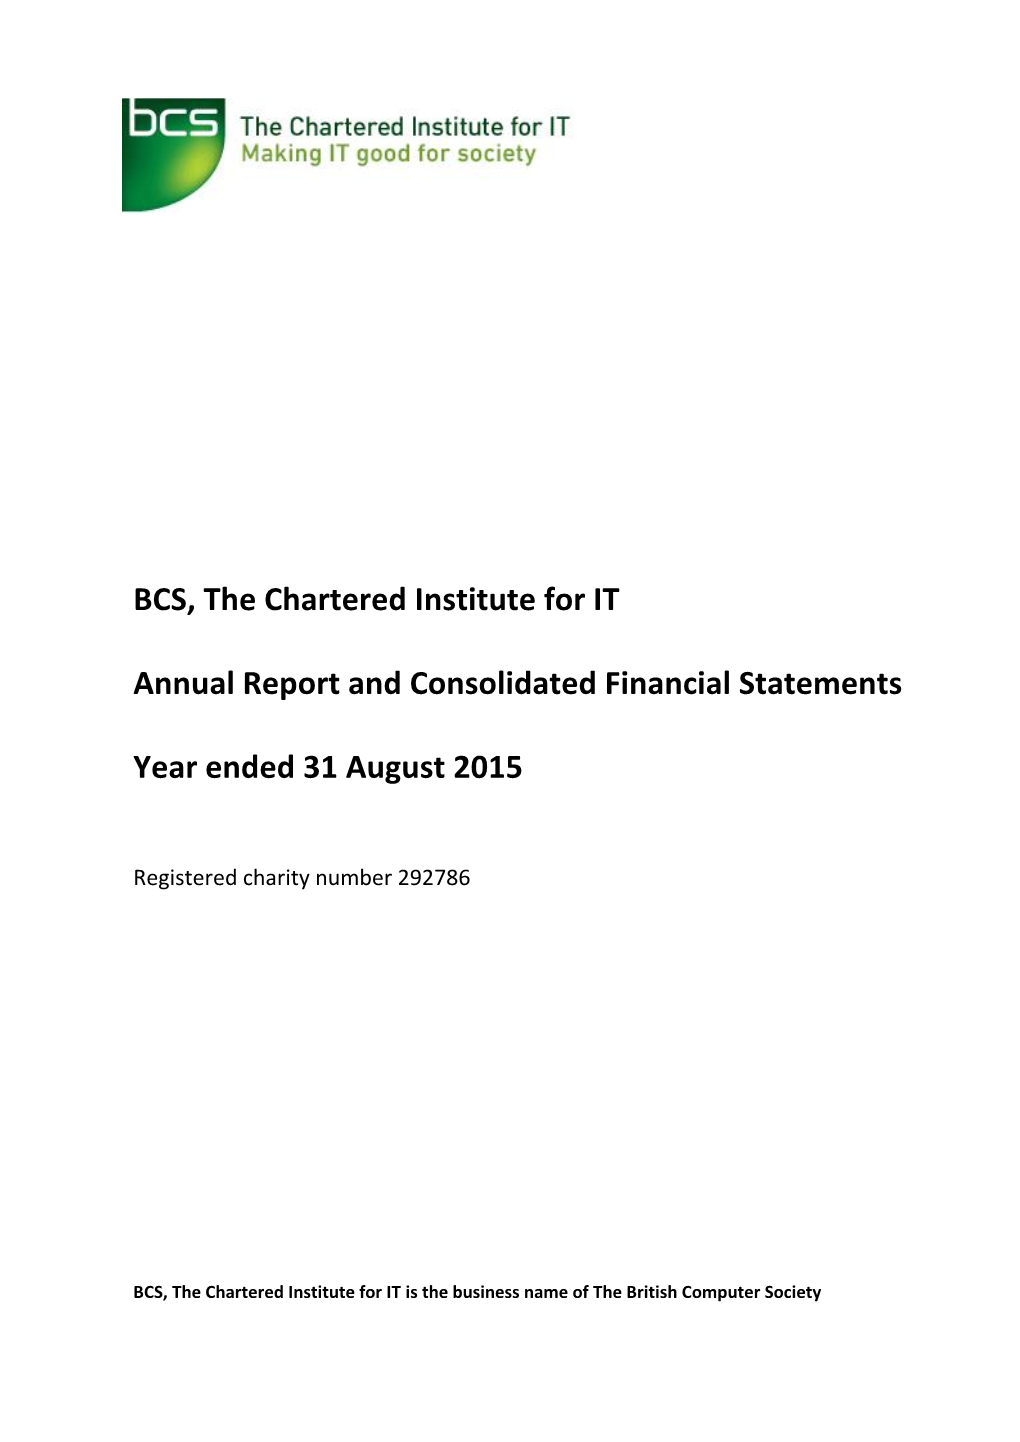 BCS, the Chartered Institute for IT Annual Report and Consolidated Financial Statements Year Ended 31 August 2015